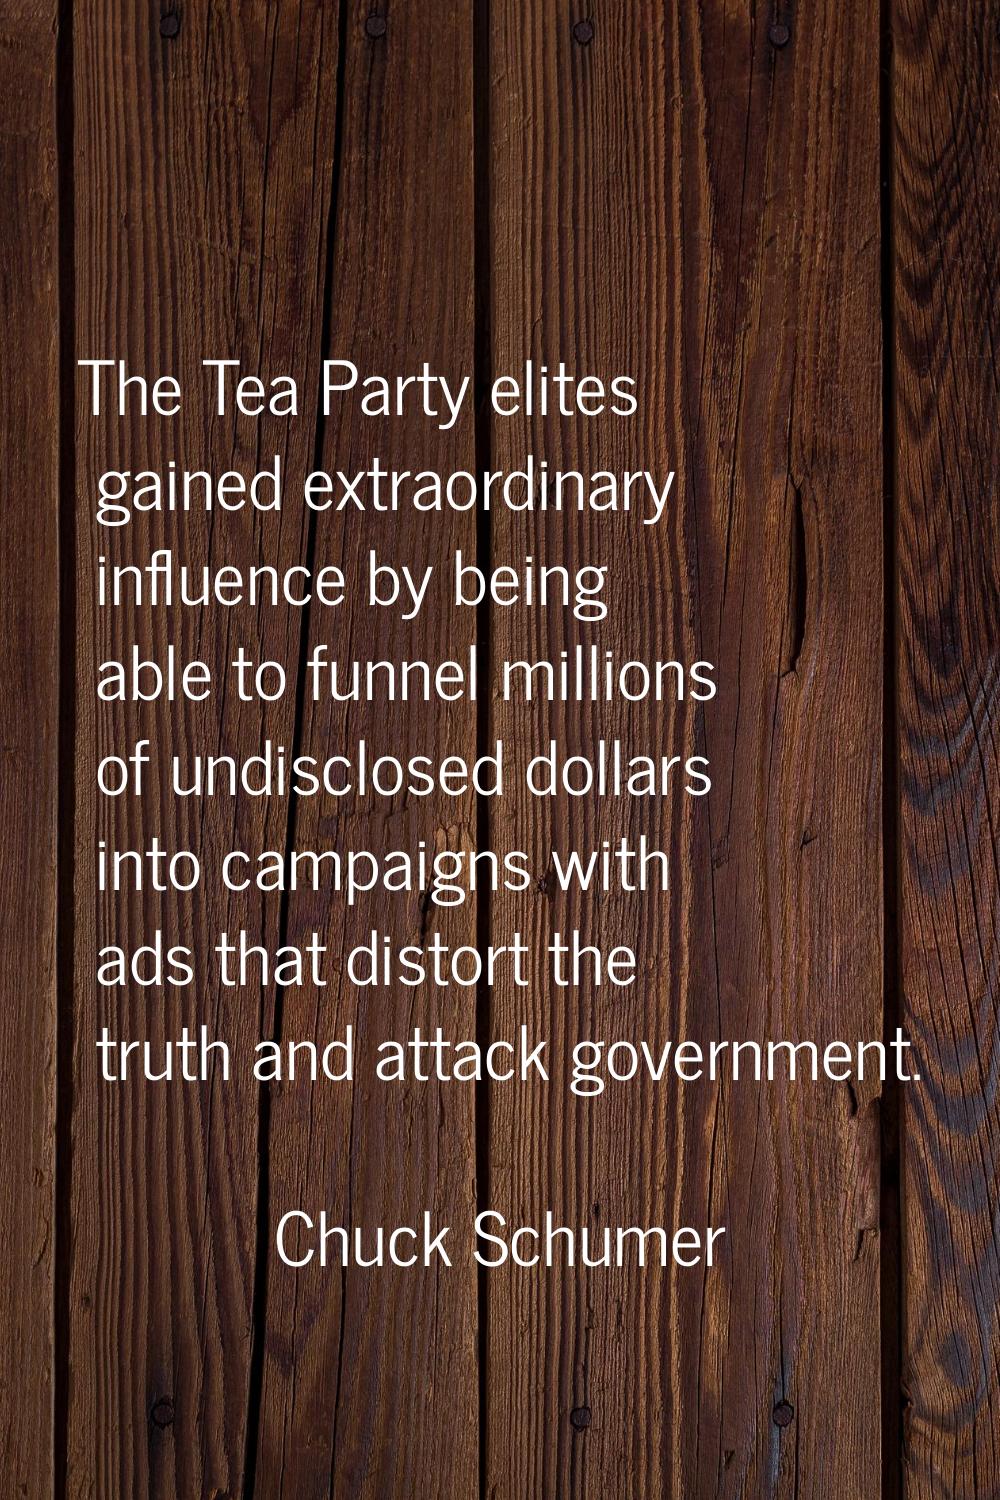 The Tea Party elites gained extraordinary influence by being able to funnel millions of undisclosed